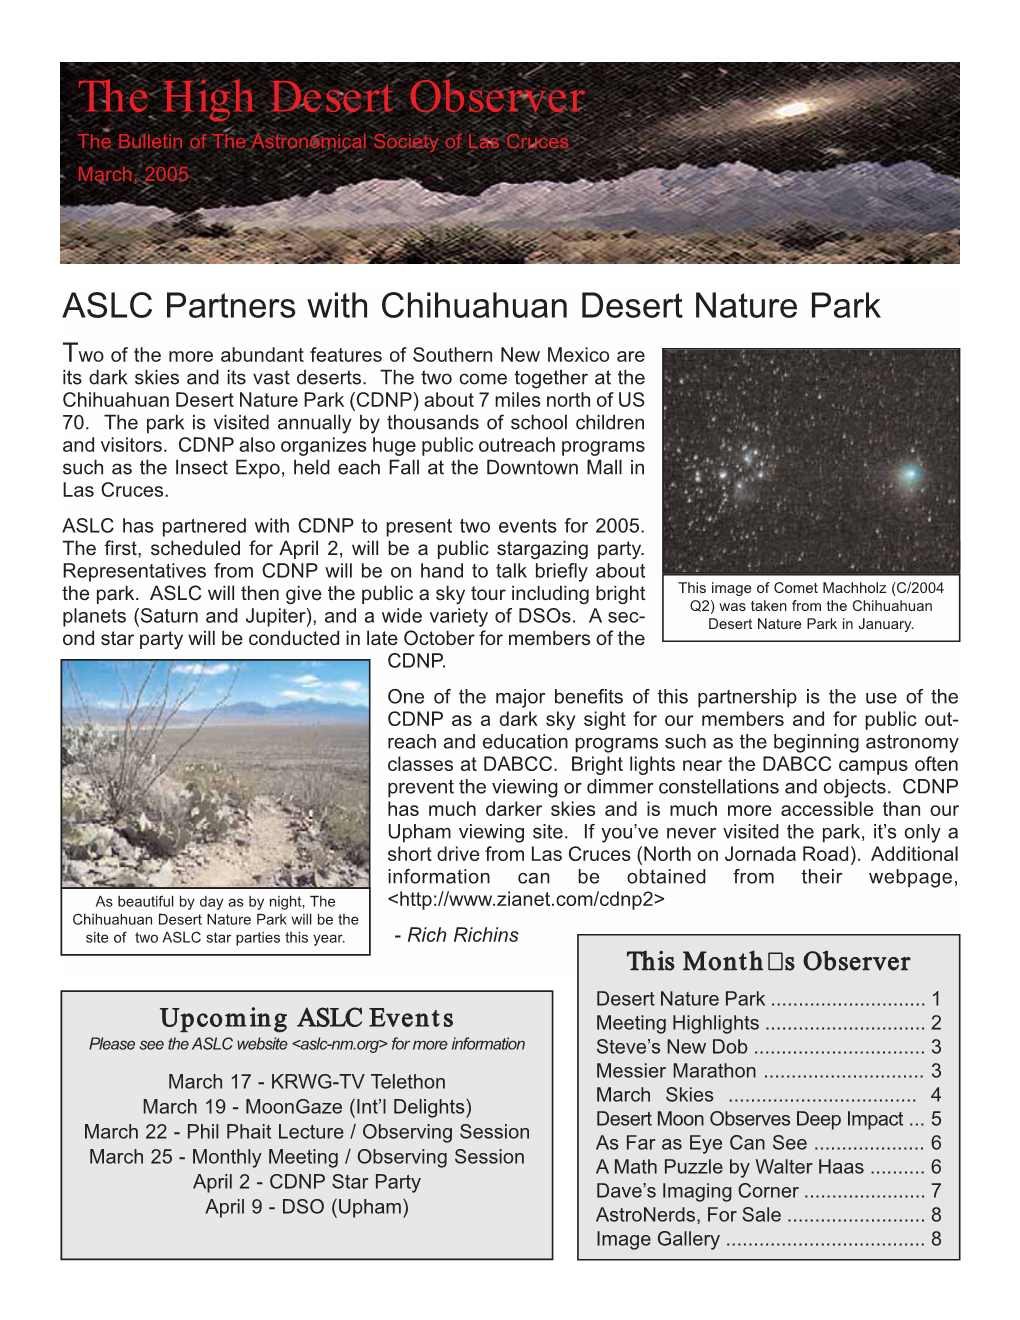 The High Desert Observer the Bulletin of the Astronomical Society of Las Cruces March, 2005